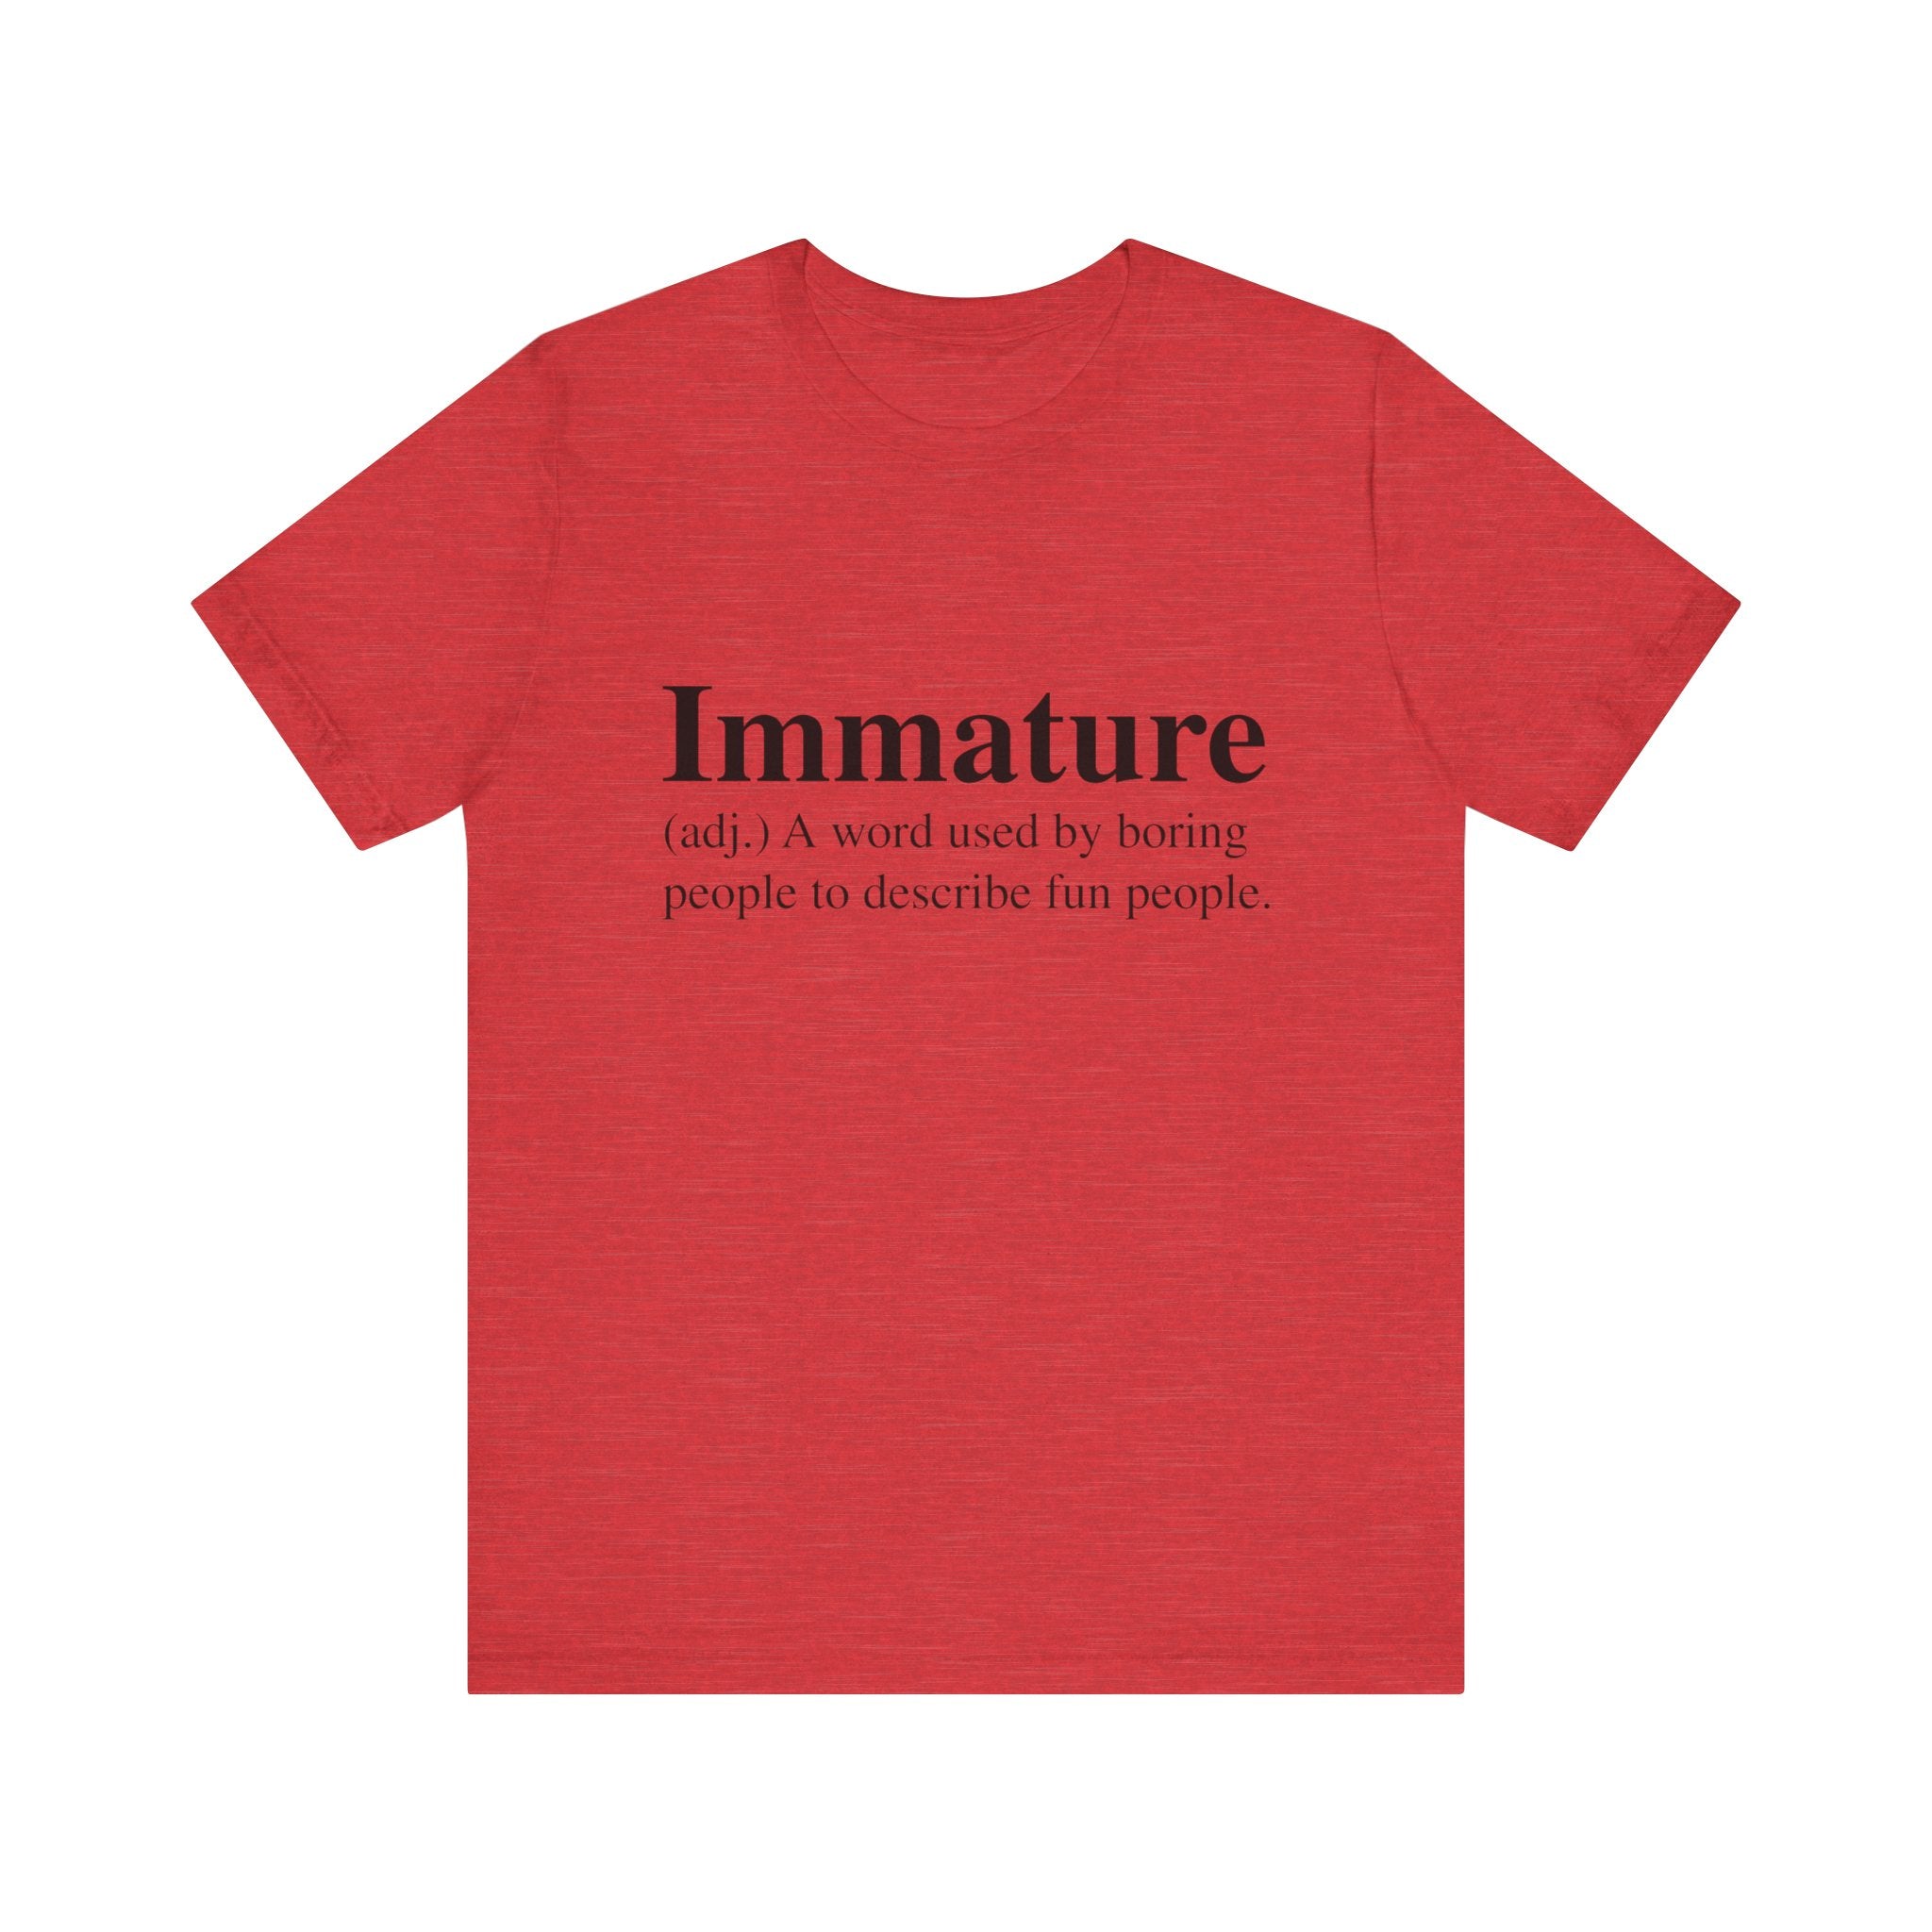 A red unisex Immature T-Shirt with the text "immature (adj.) a word used by boring people to describe fun people" printed in black on the front.